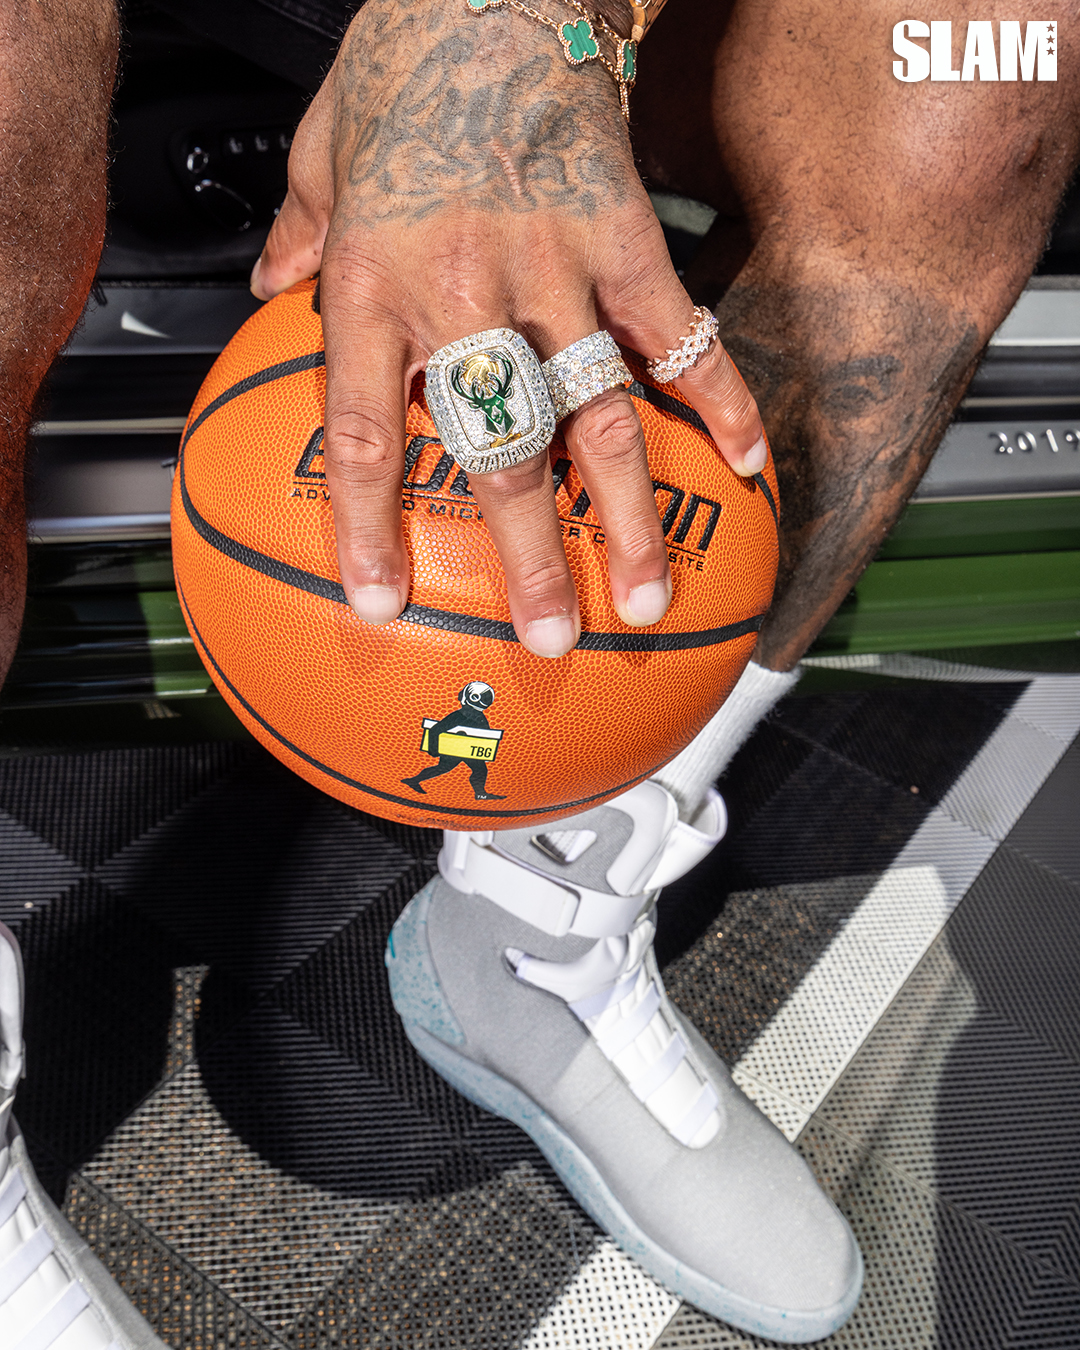 P.J. Tucker is NOT The Sneaker King… He’s Much More